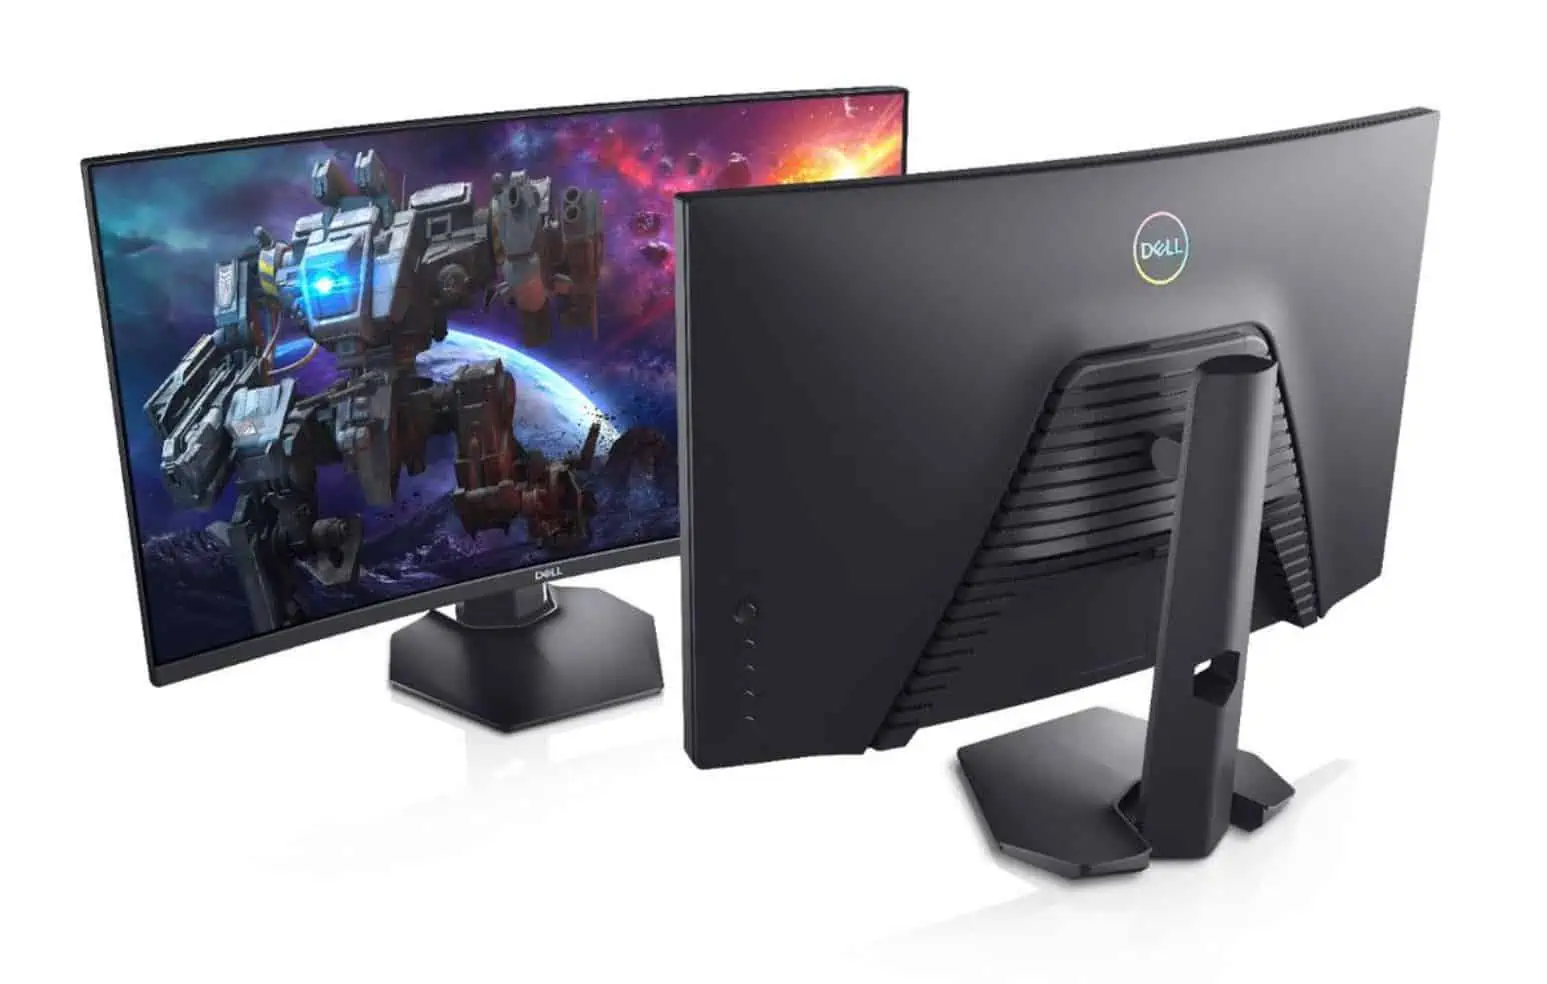 Dell launches new 27-inch Curved Gaming Monitor with 144Hz refresh rate for just $279